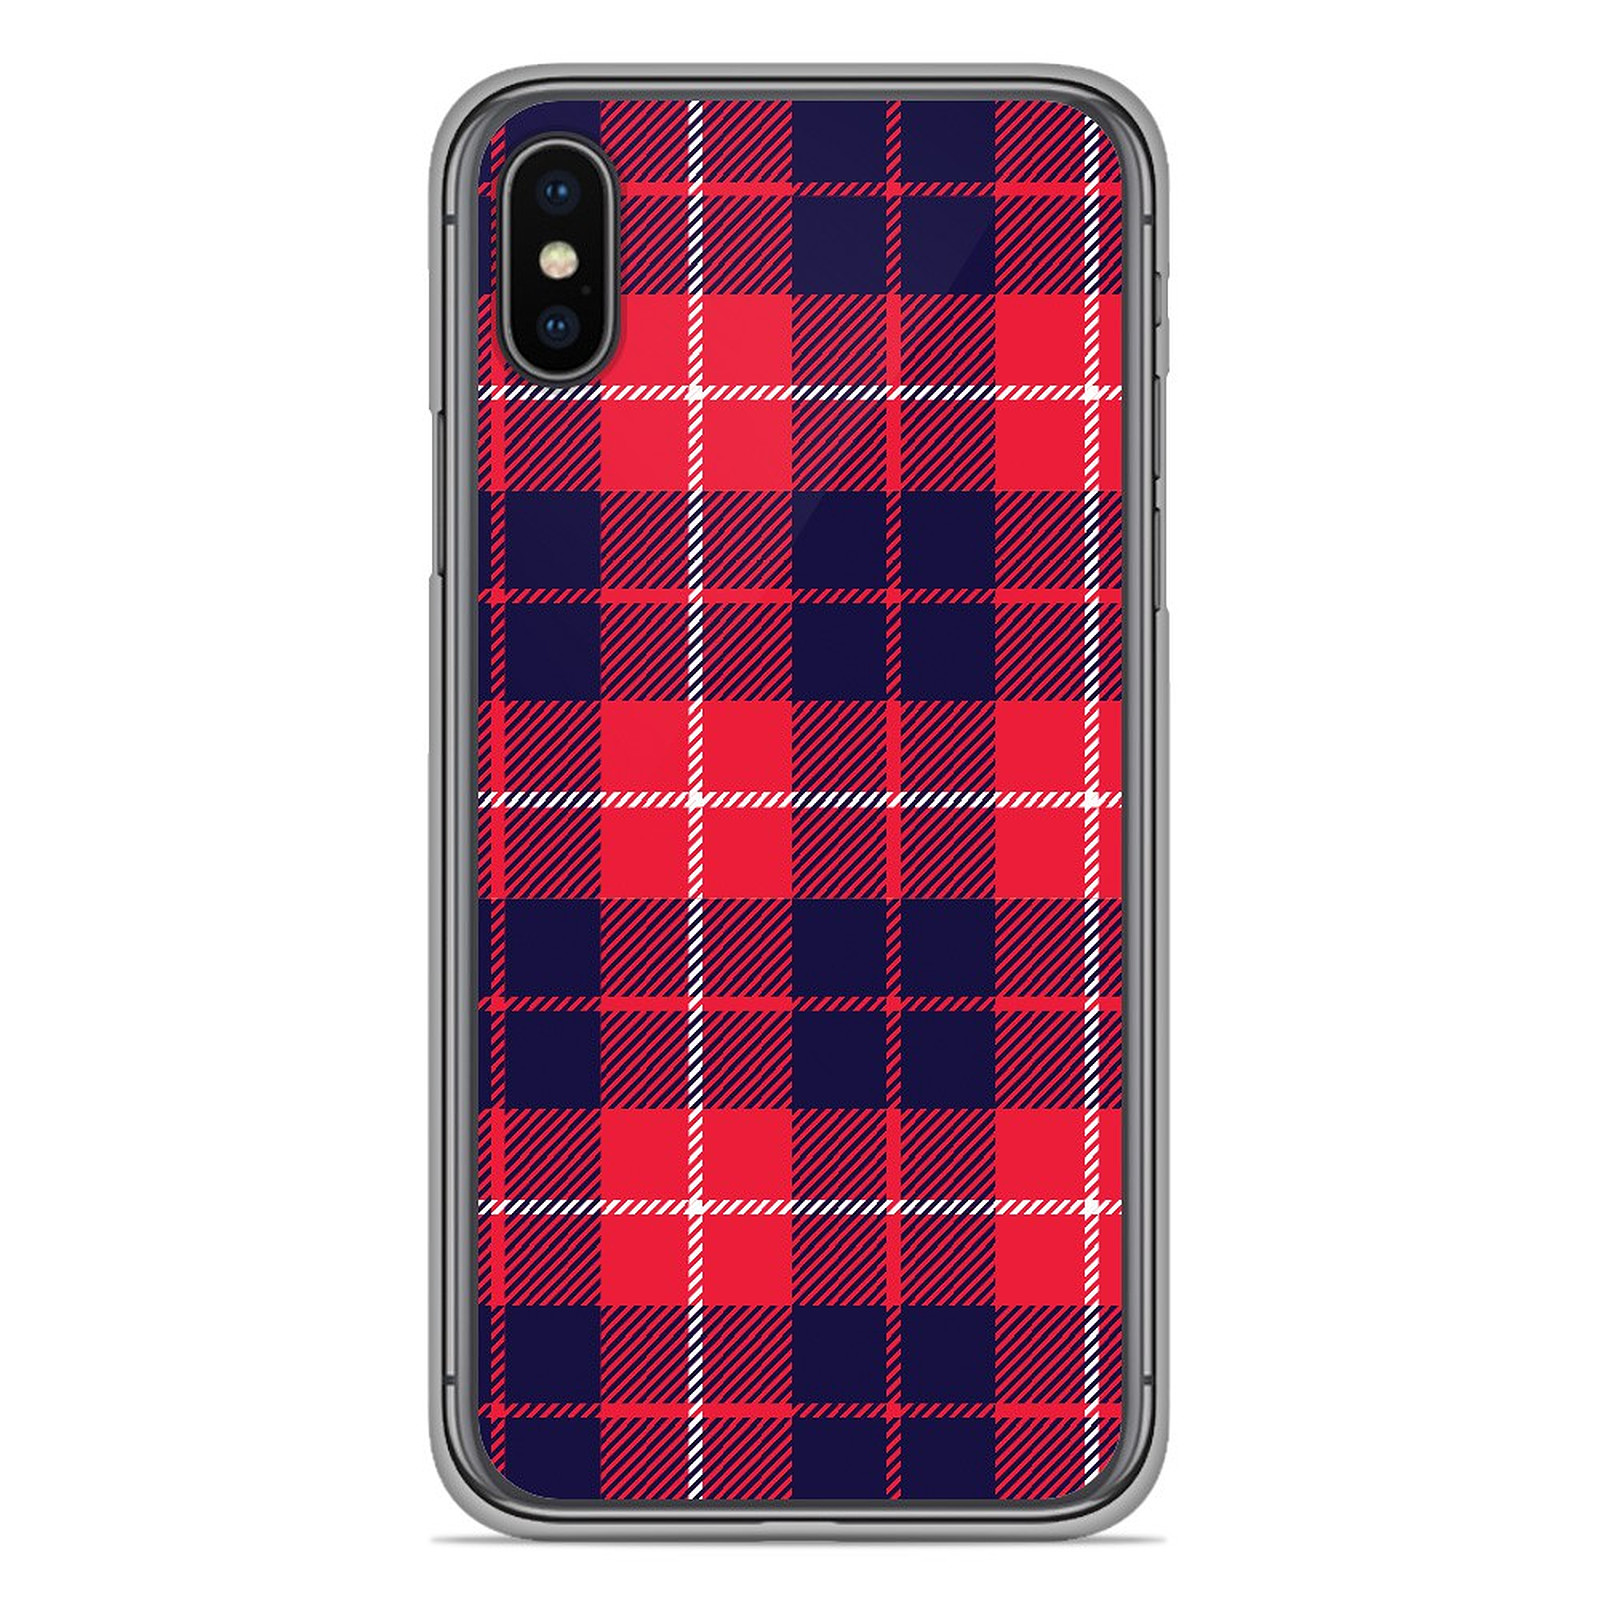 1001 Coques Coque silicone gel Apple iPhone X motif Tartan Rouge 2 - Coque telephone 1001Coques